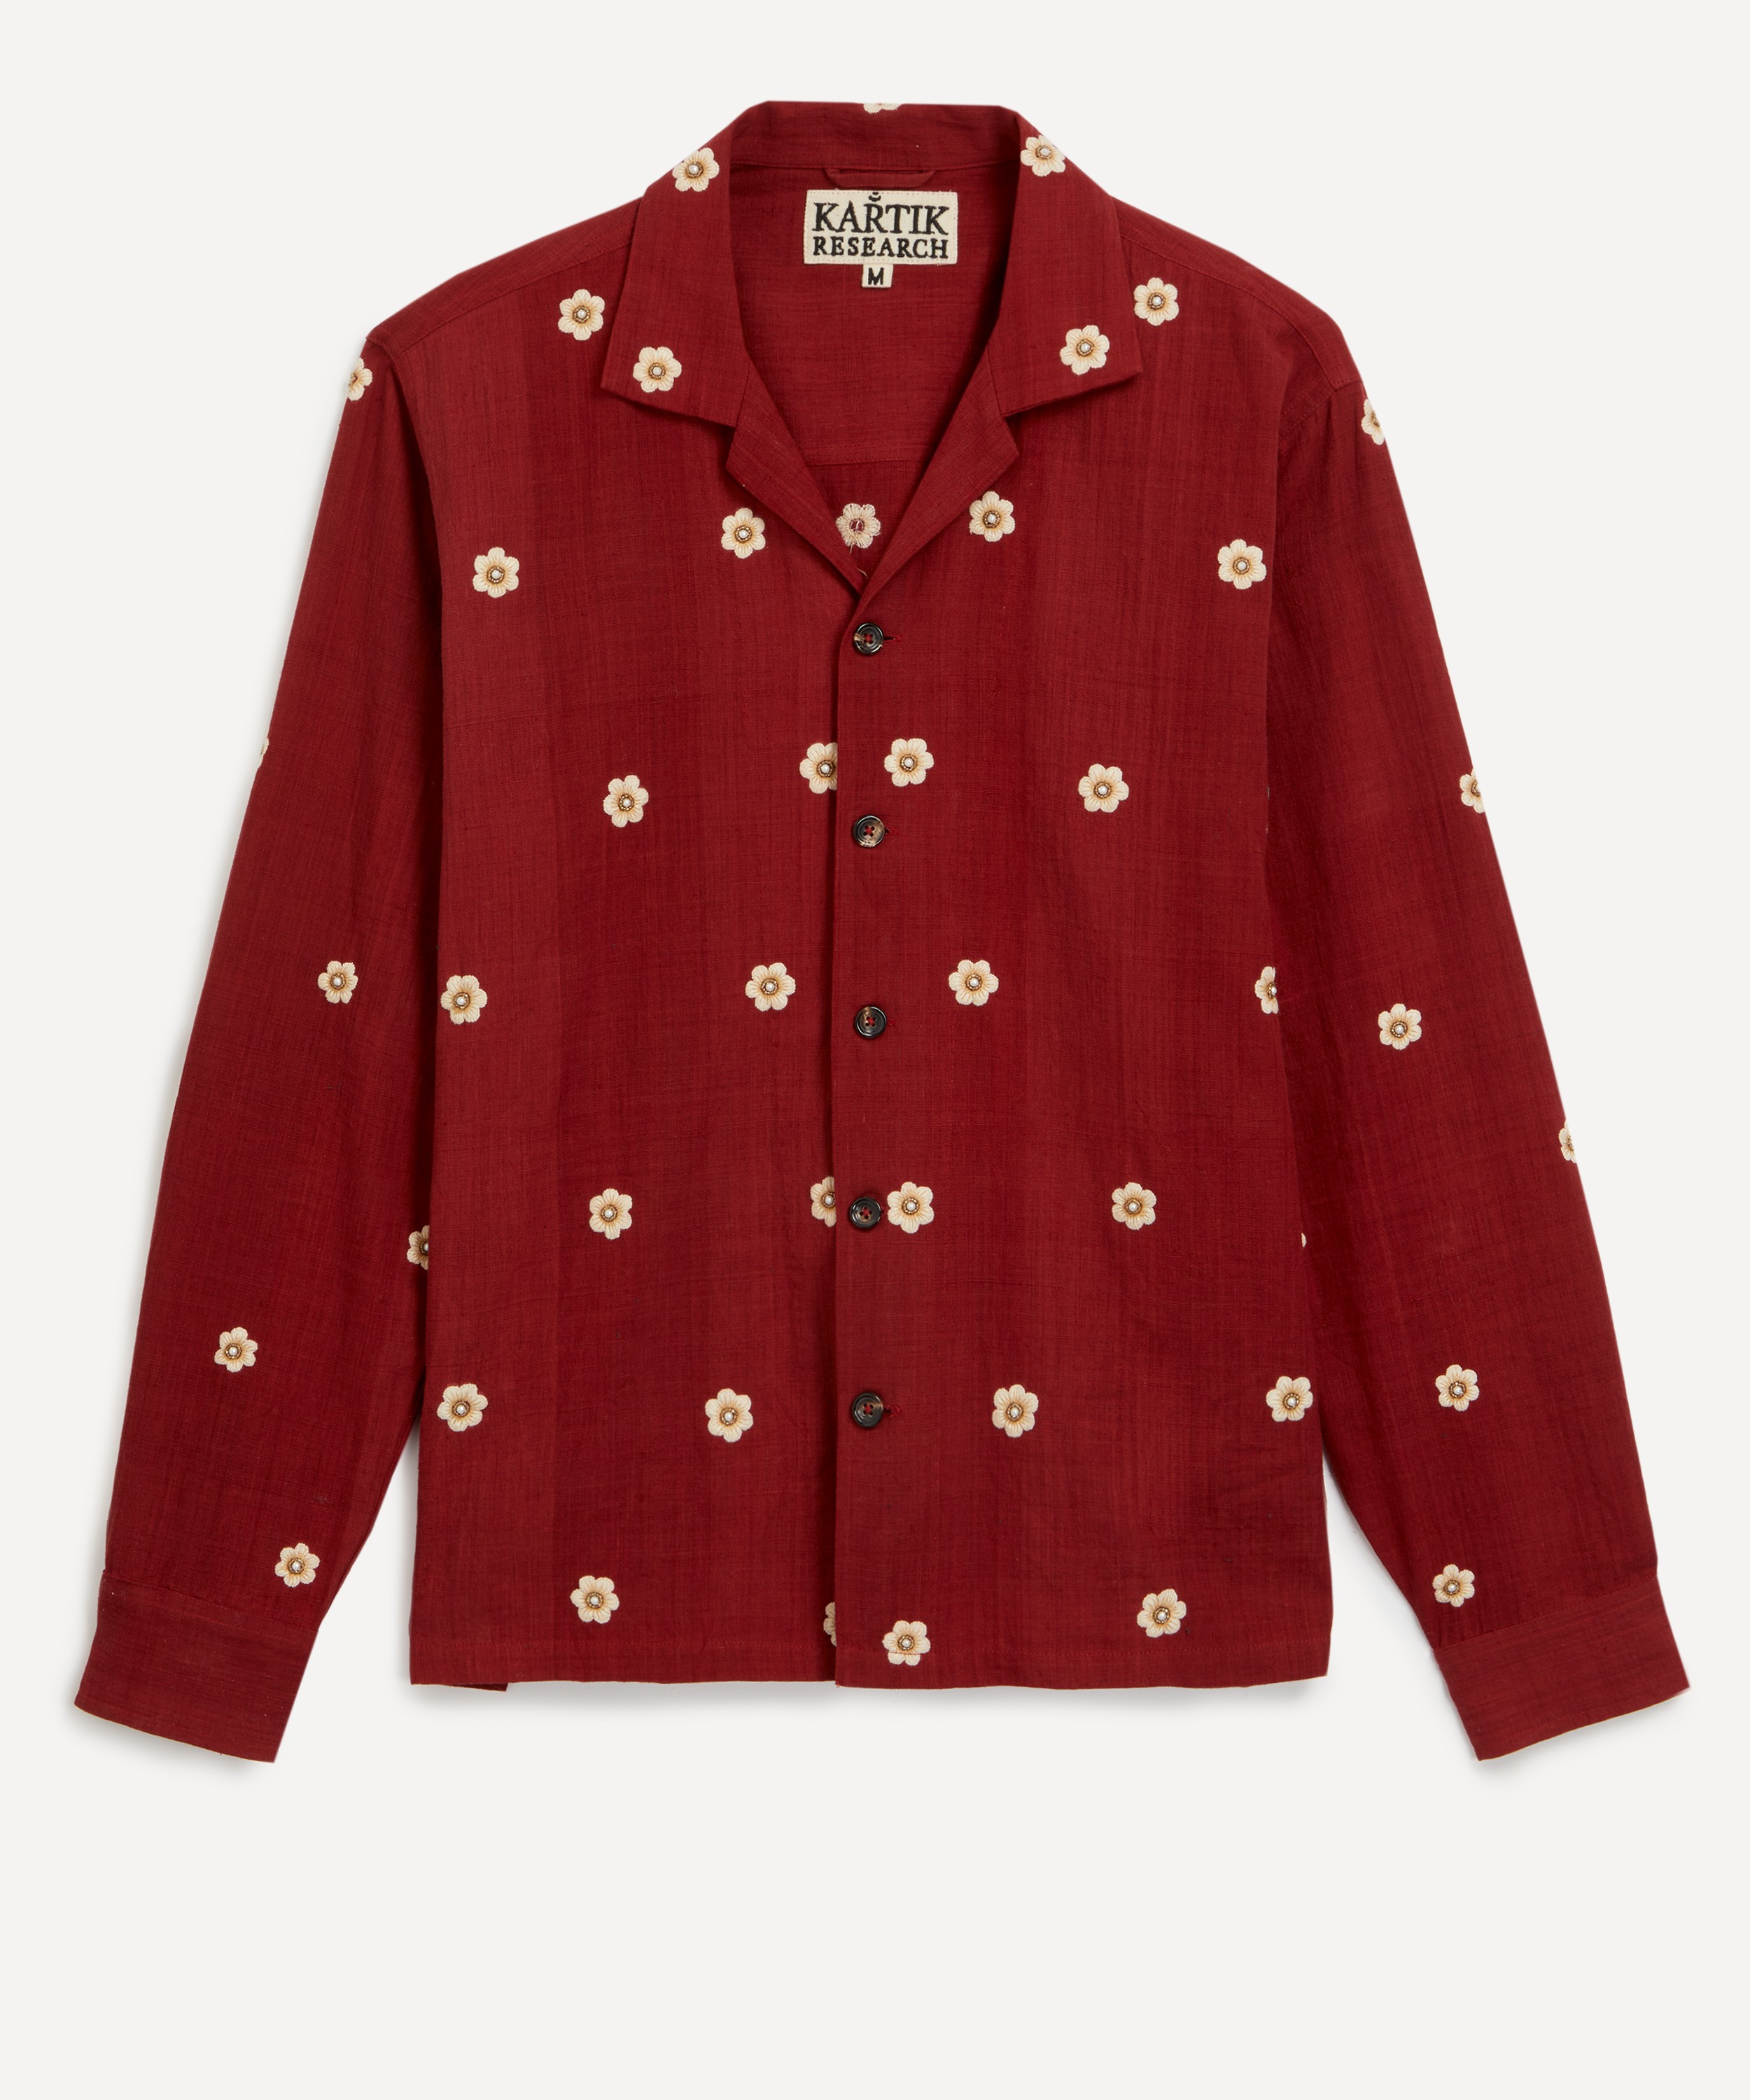 Kartik Research - Red Hand-Embroidered Floral Shirt